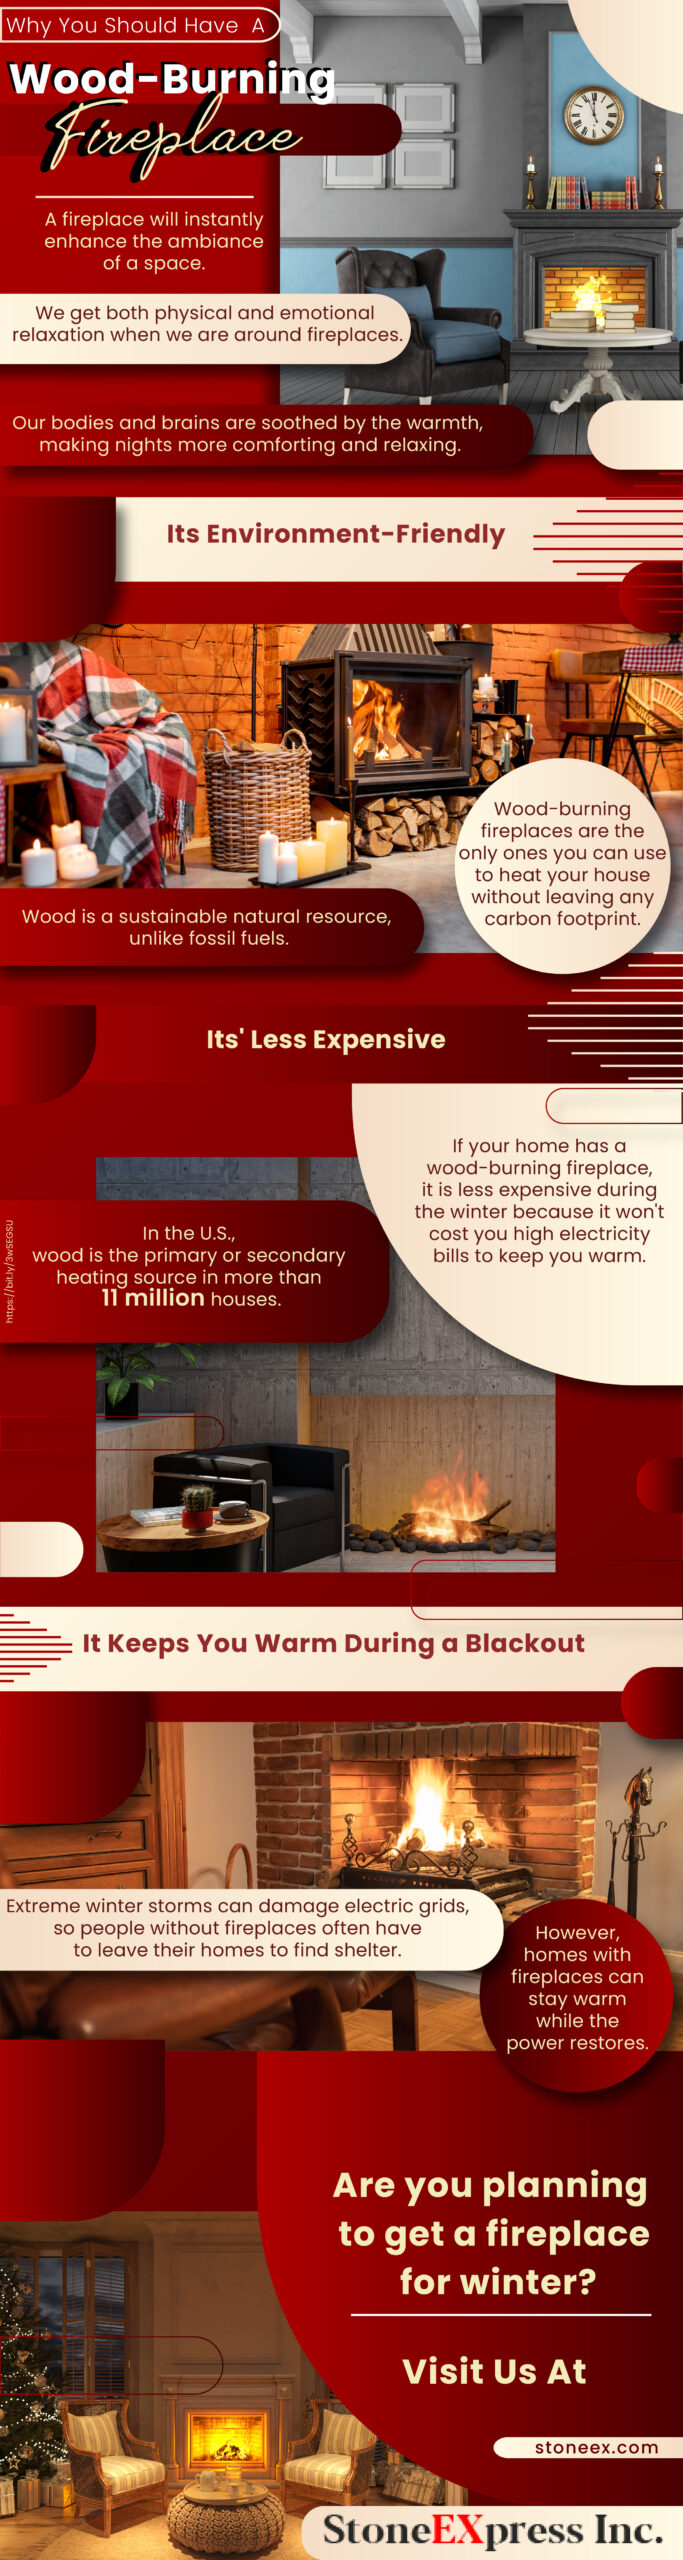 Why You Should Have A Wood-Burning Fireplace Infograph